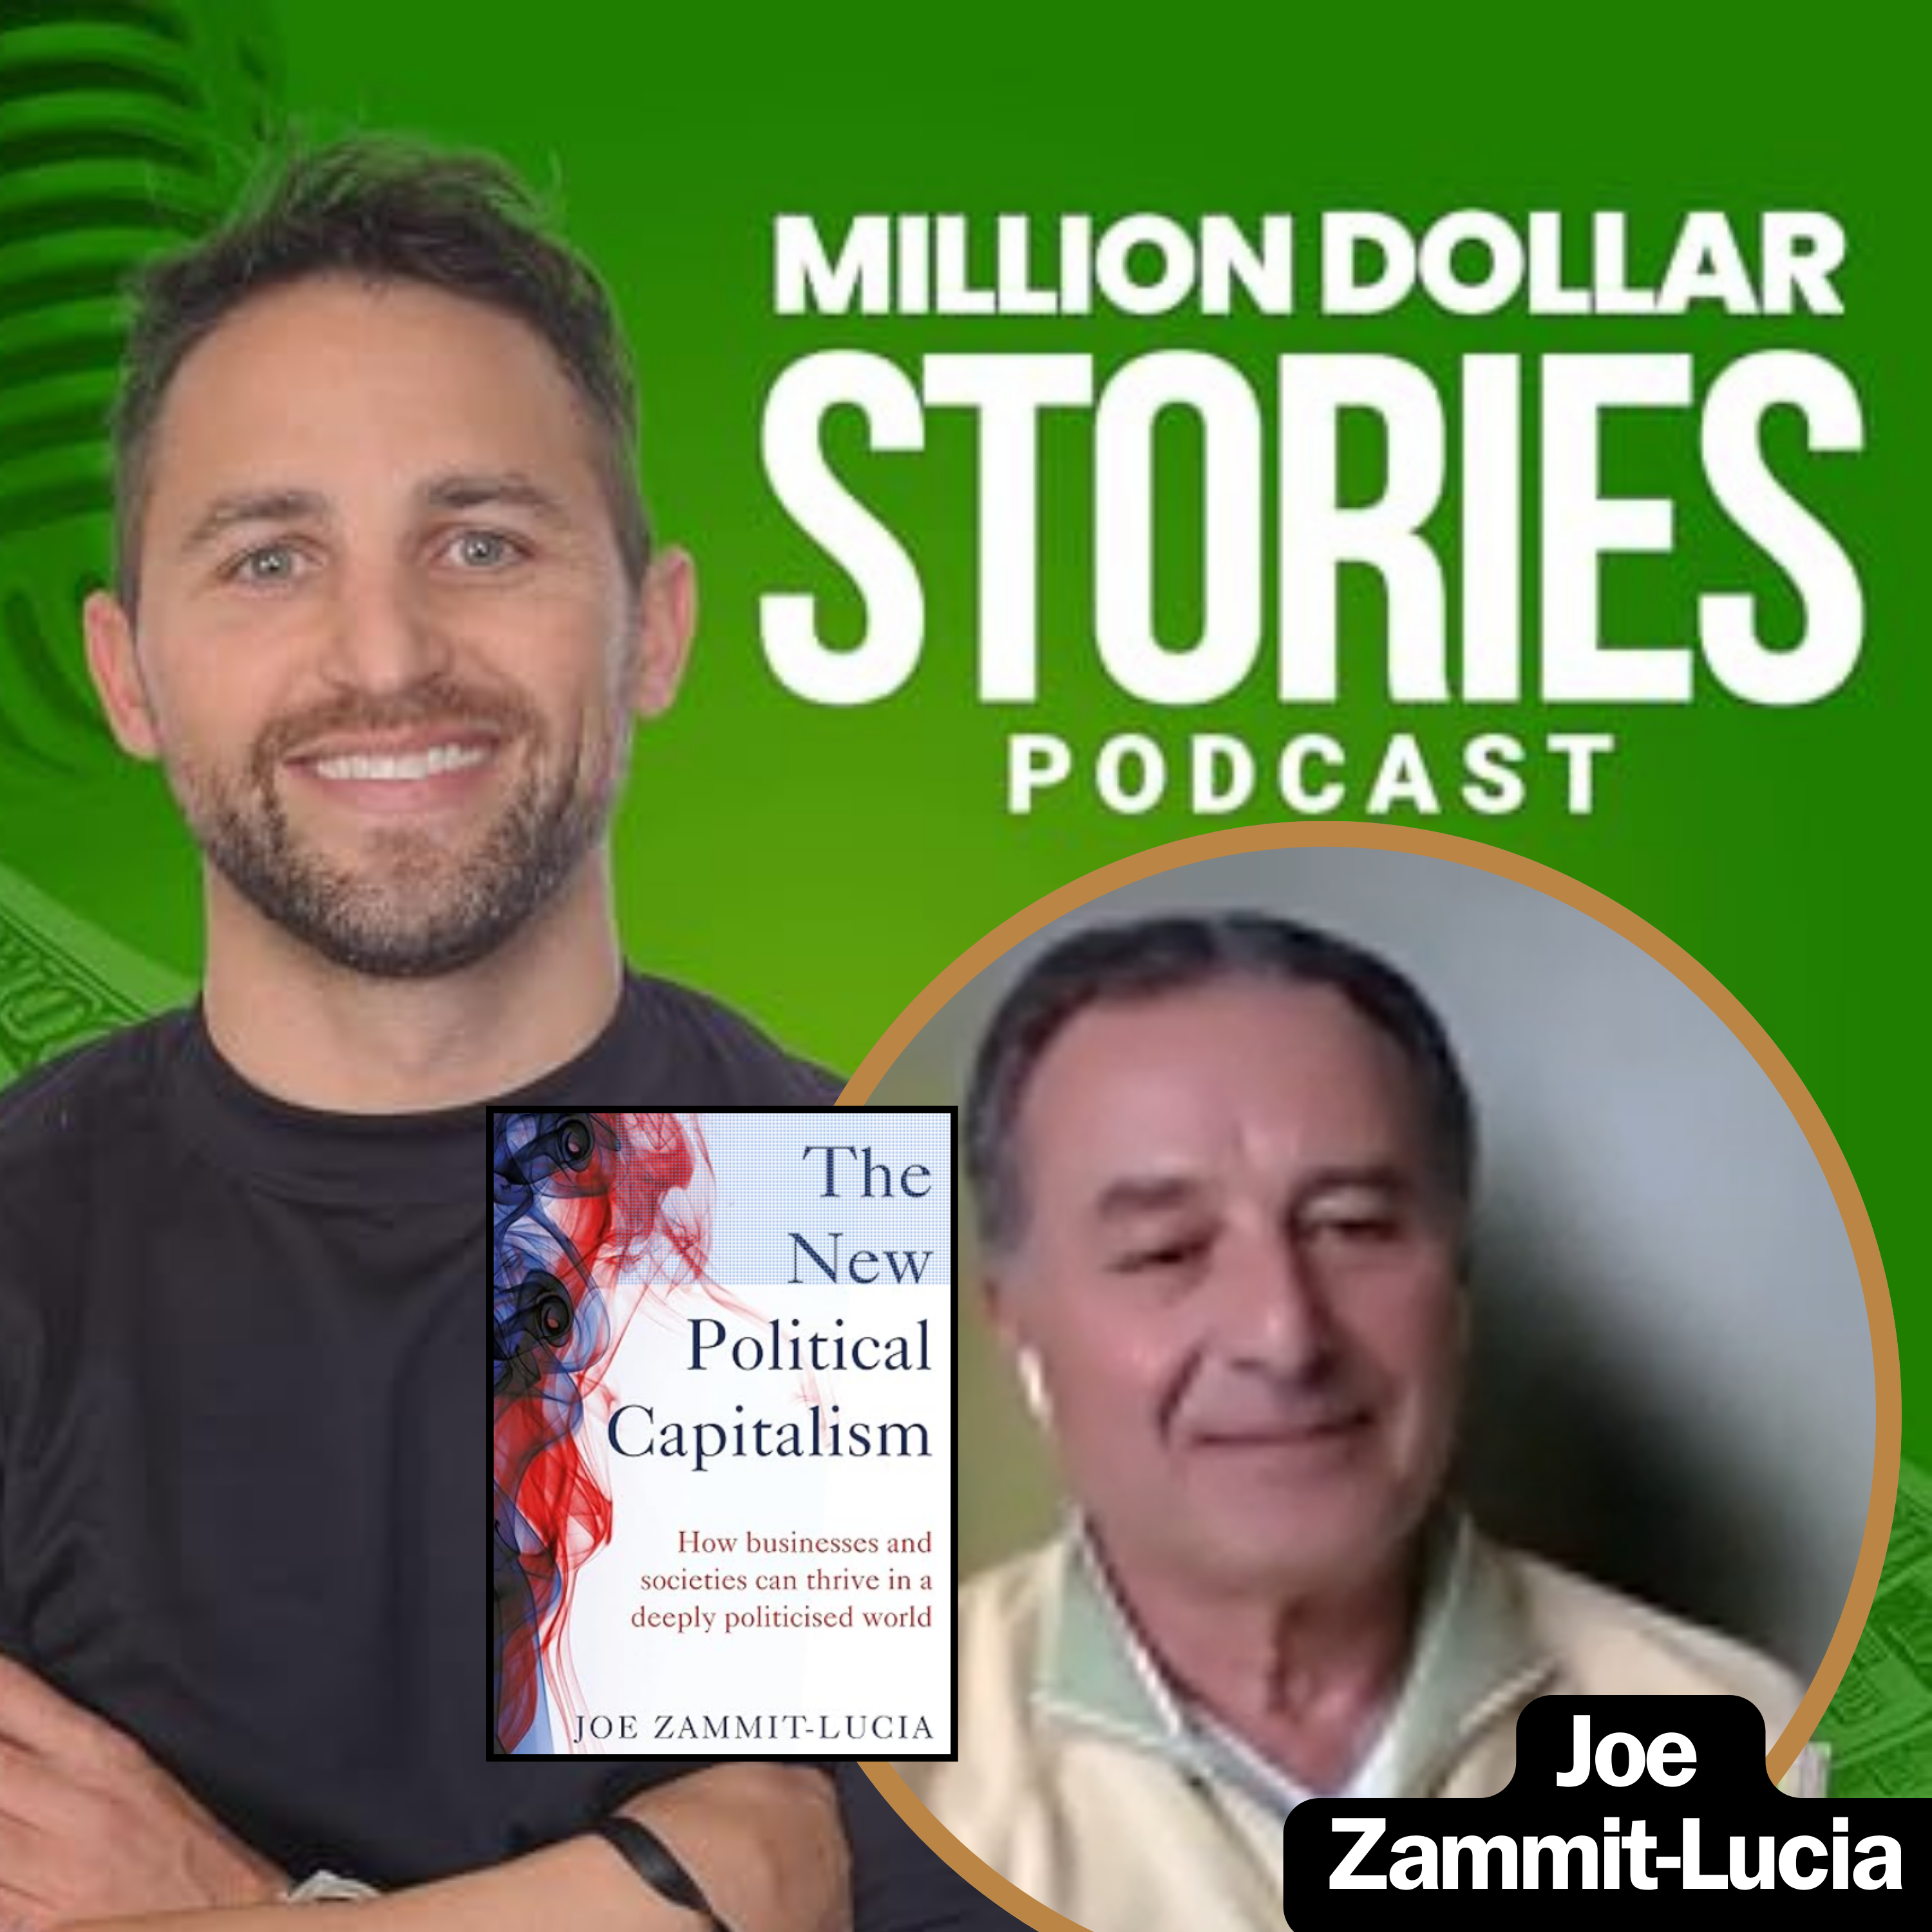 Joe Zammit-Lucia – Author of “The New Political Capitalism: How Businesses and Societies Can Thrive in a Deeply Politicized World”